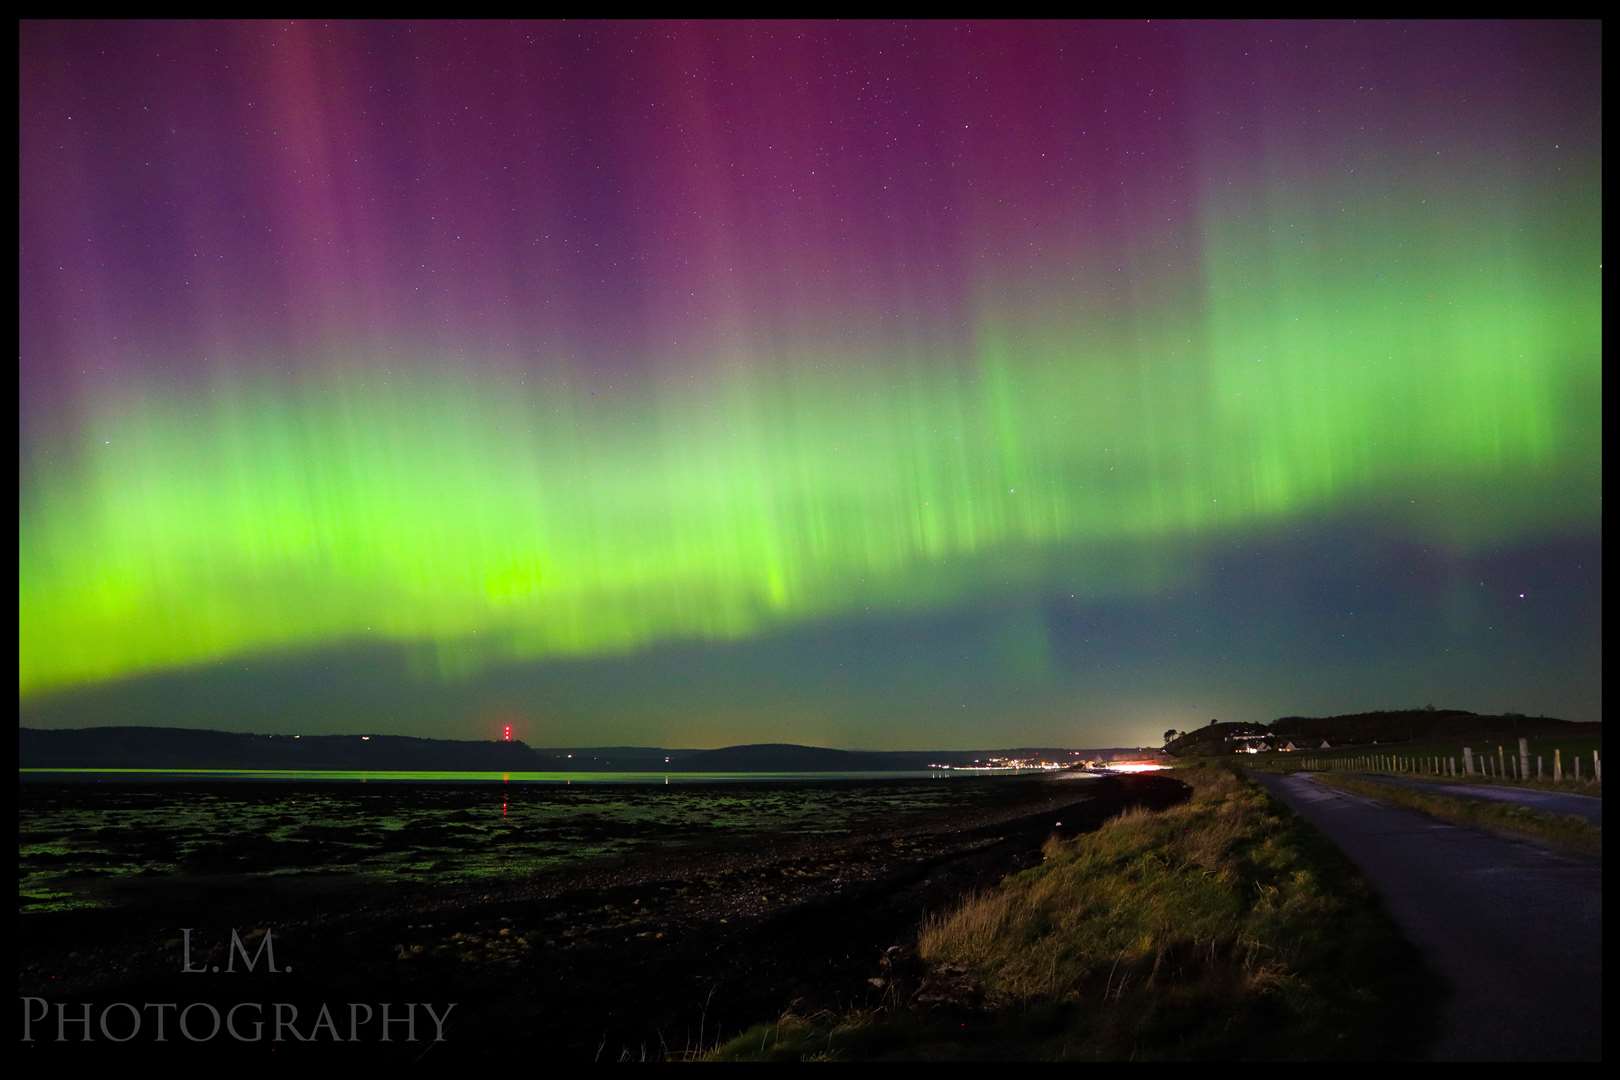 Leanne McGillivray took this image of the aurora outside Inverness next to the A96.